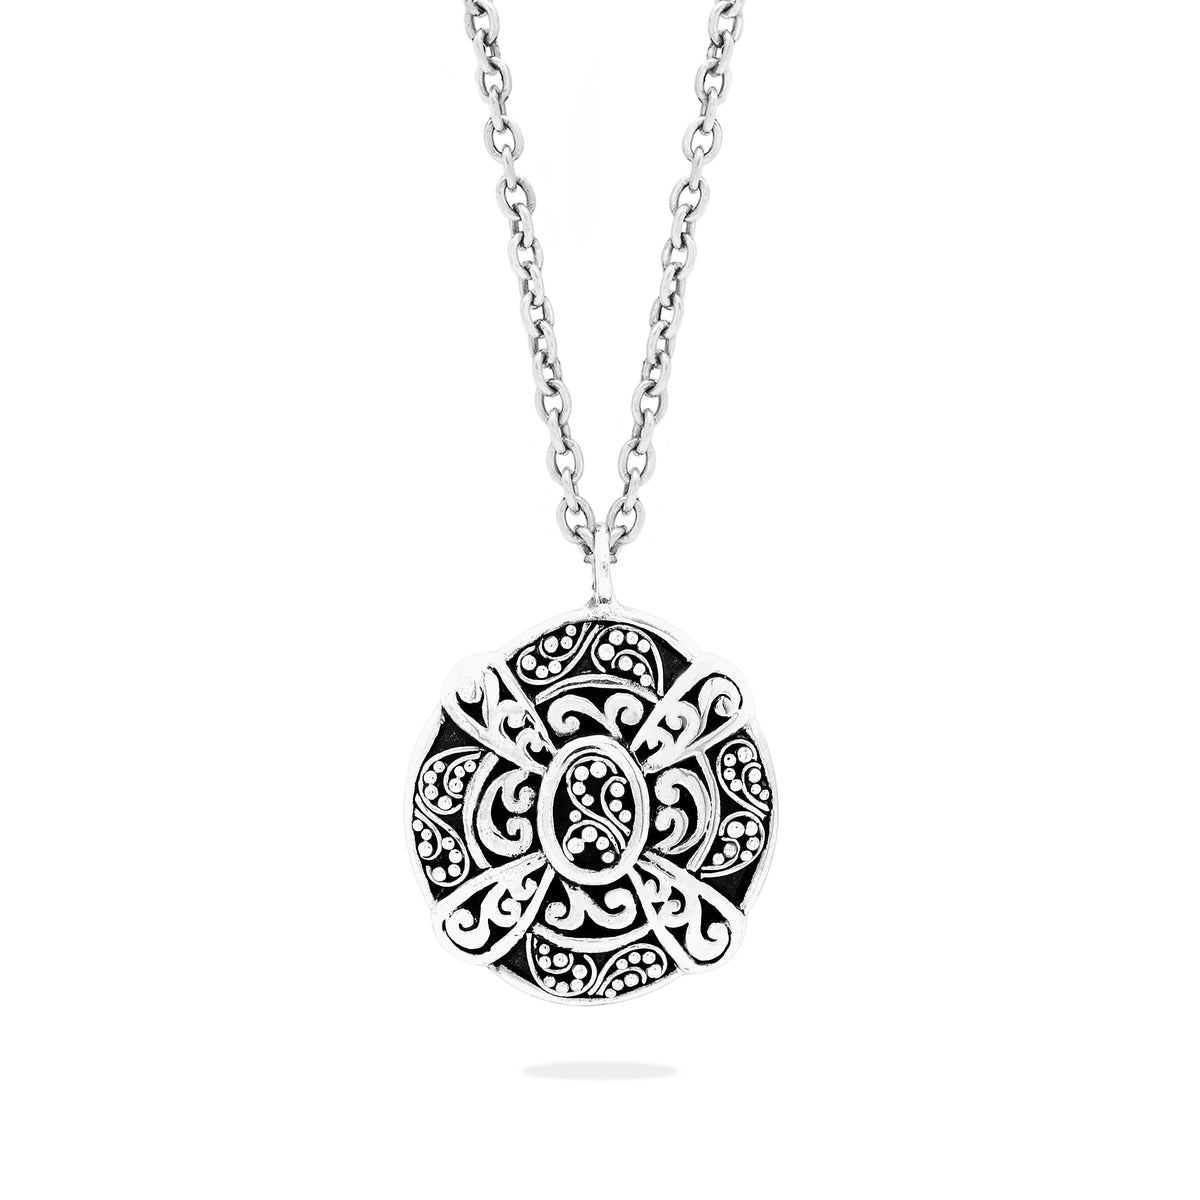 Classic Granulated with Signature Scroll Alhambra Pendant Necklace - Lois Hill Jewelry